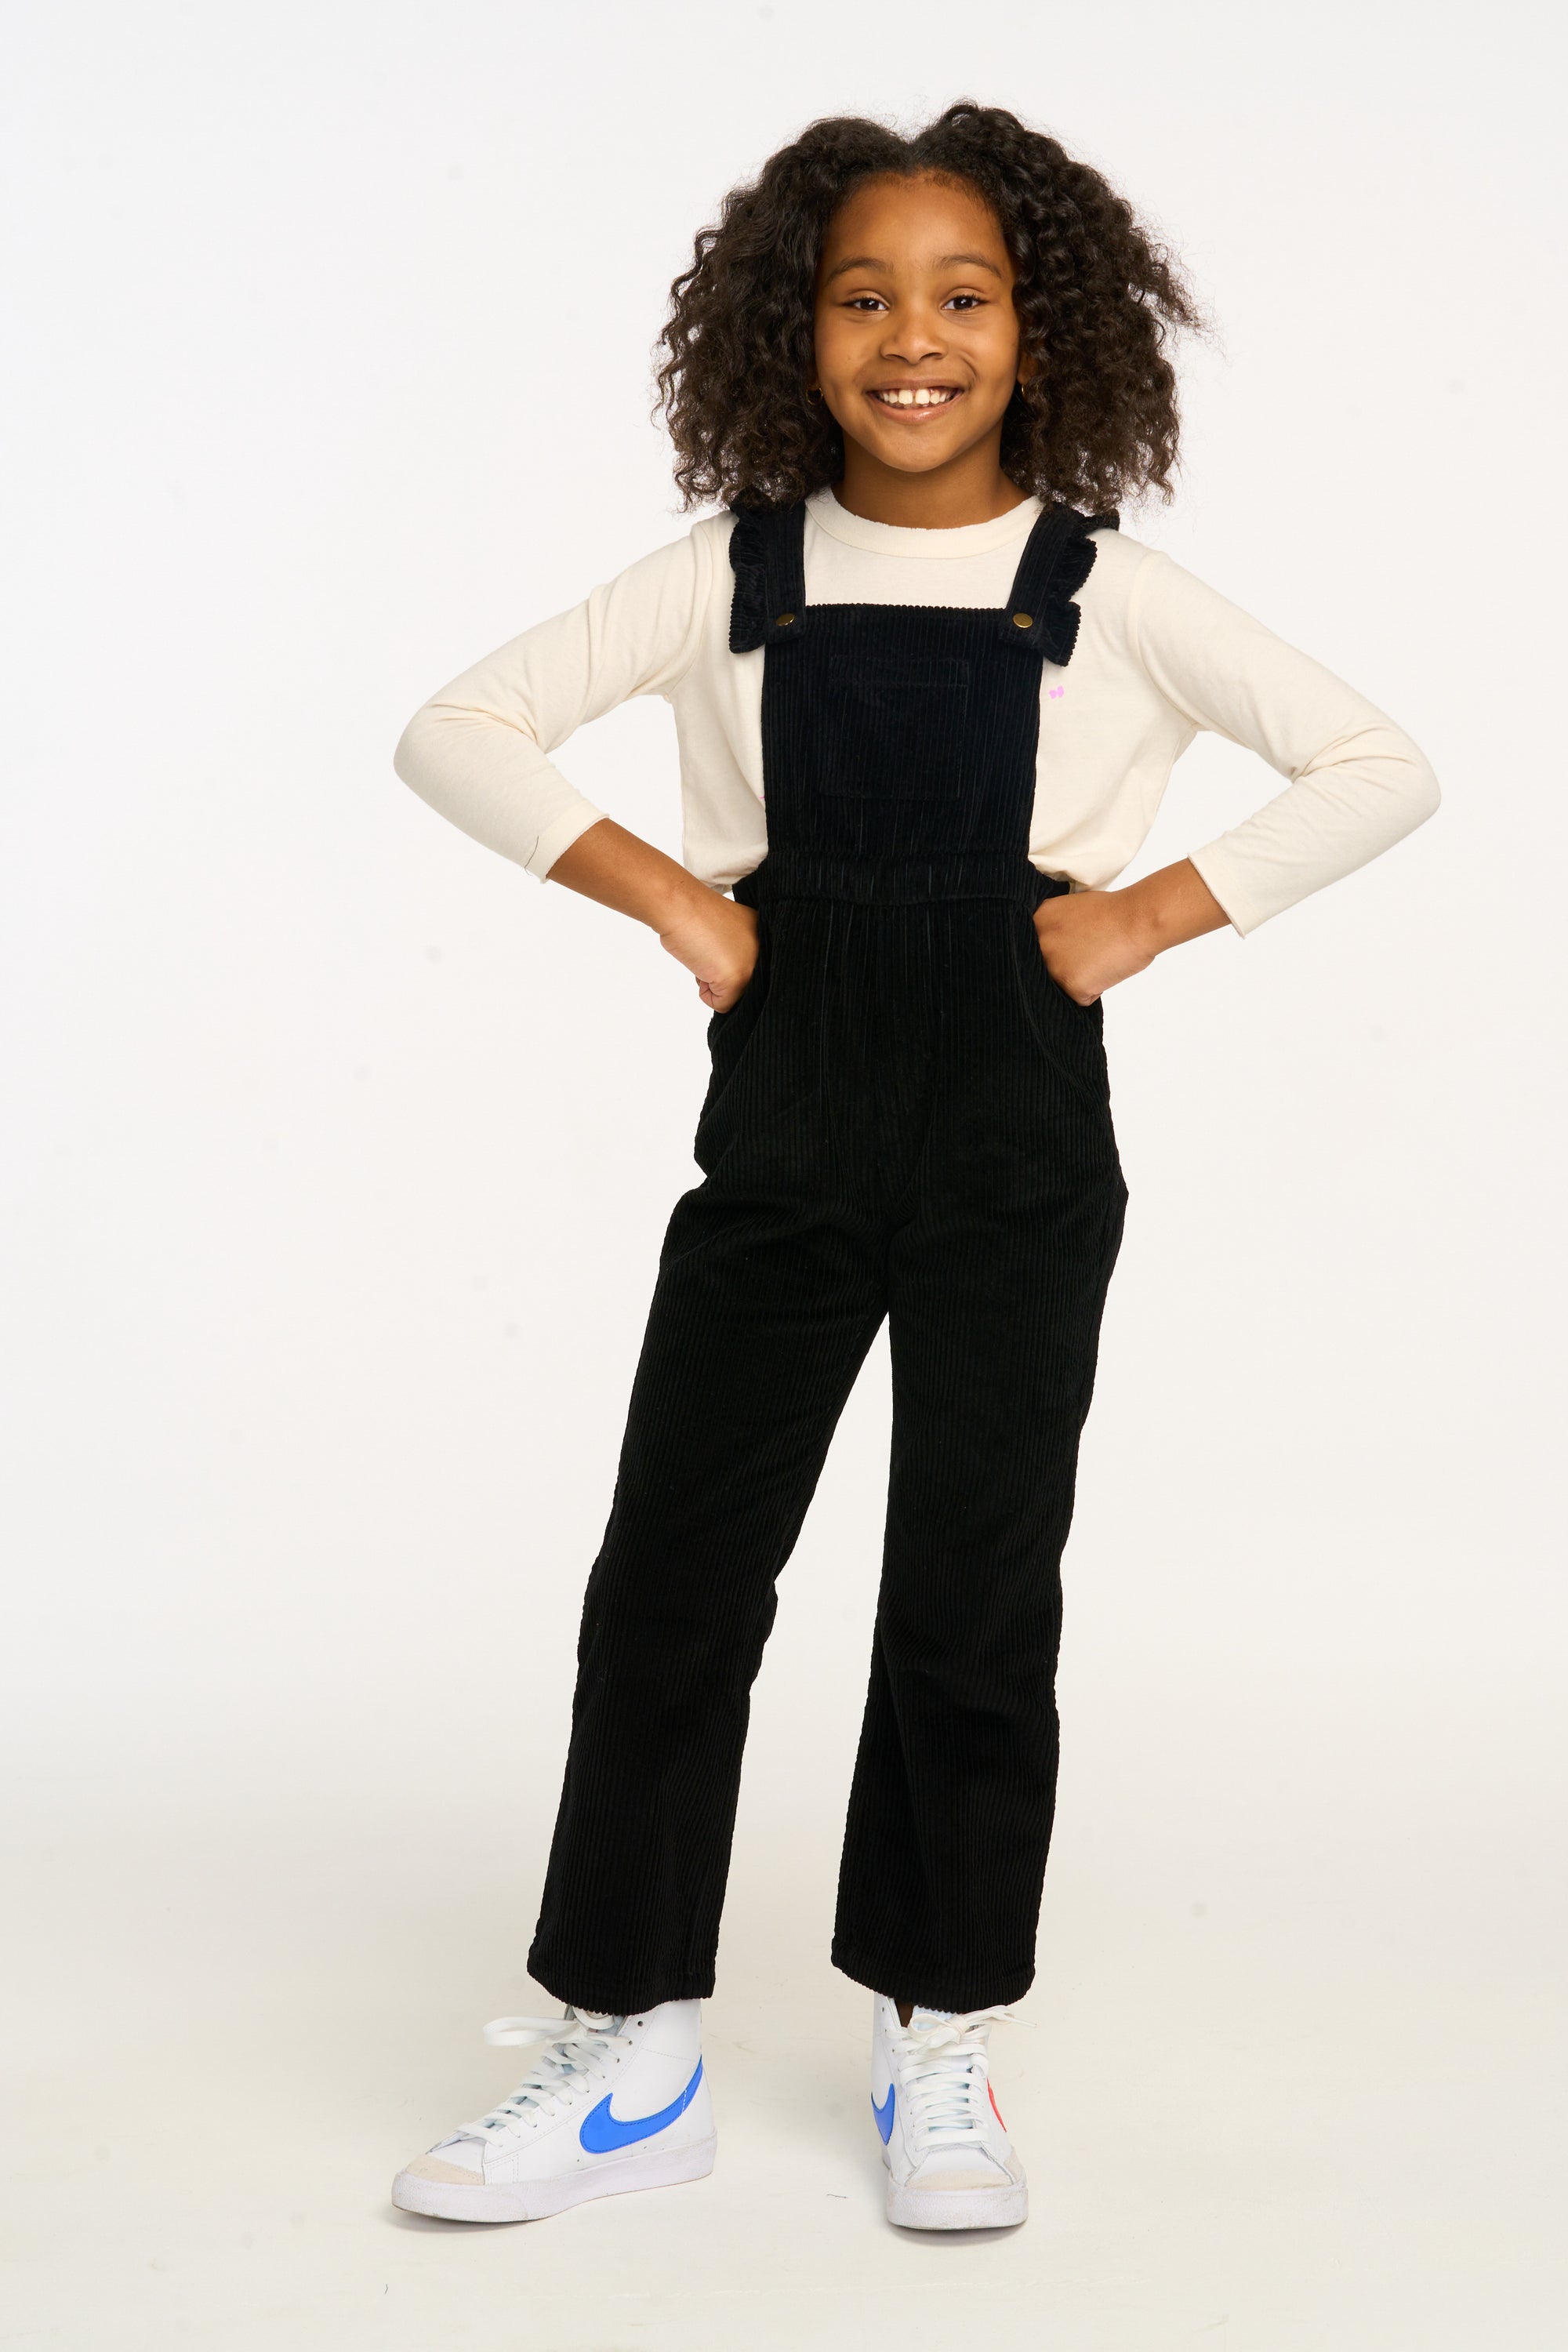 Fairy Overall Raven Black Corduroy GIRLS chaserbrand